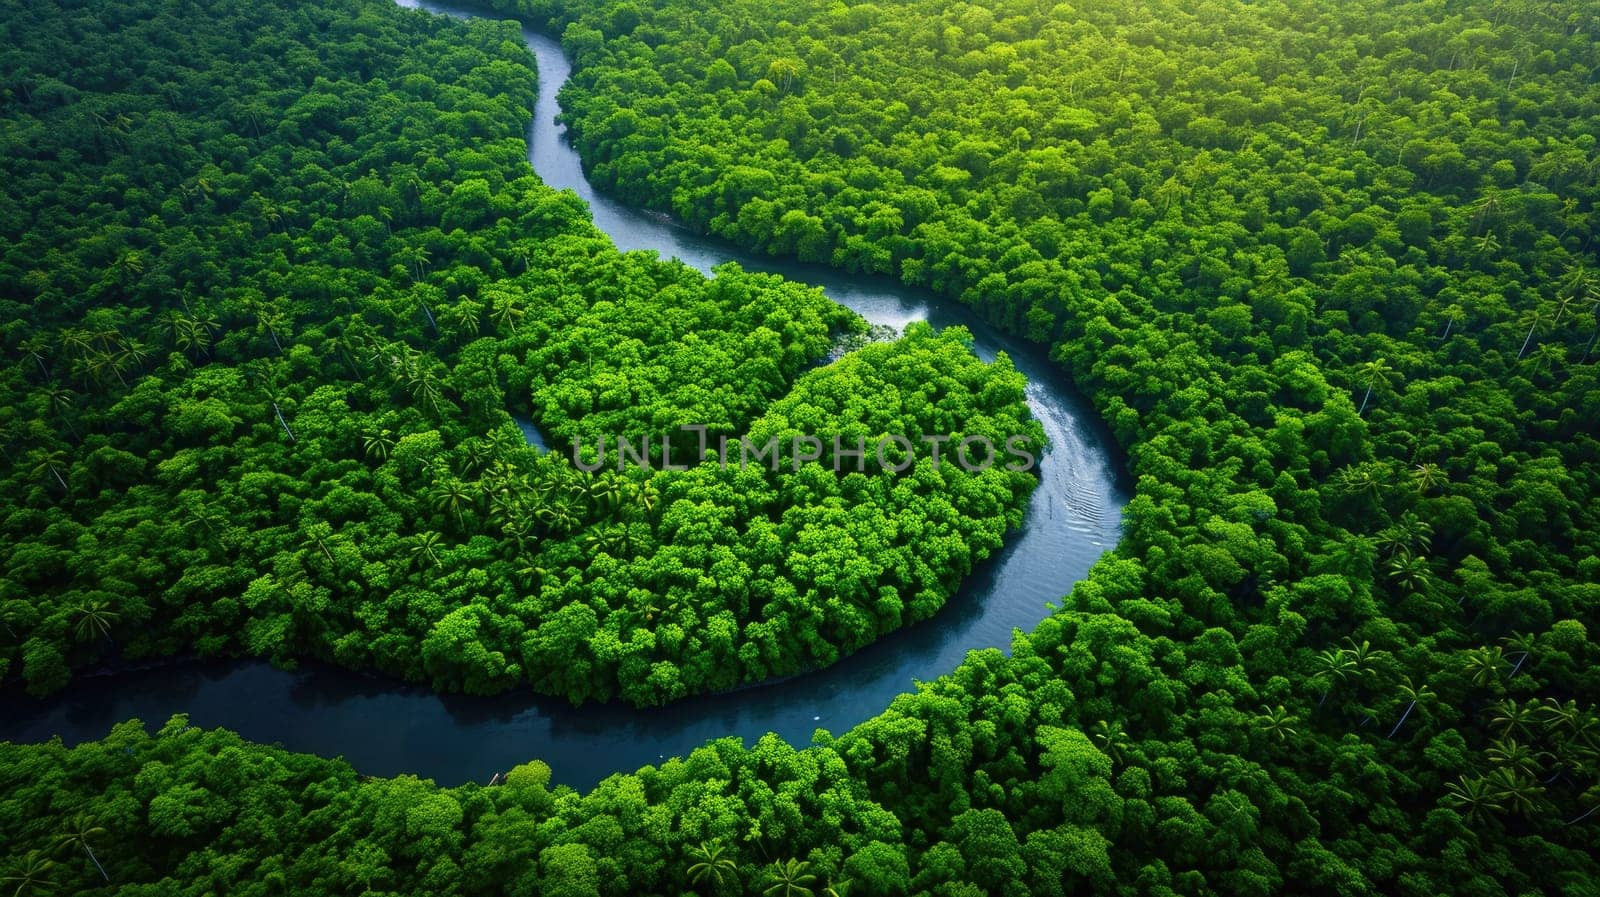 Aerial View of Meandering River Through Lush Forest. Resplendent. by biancoblue